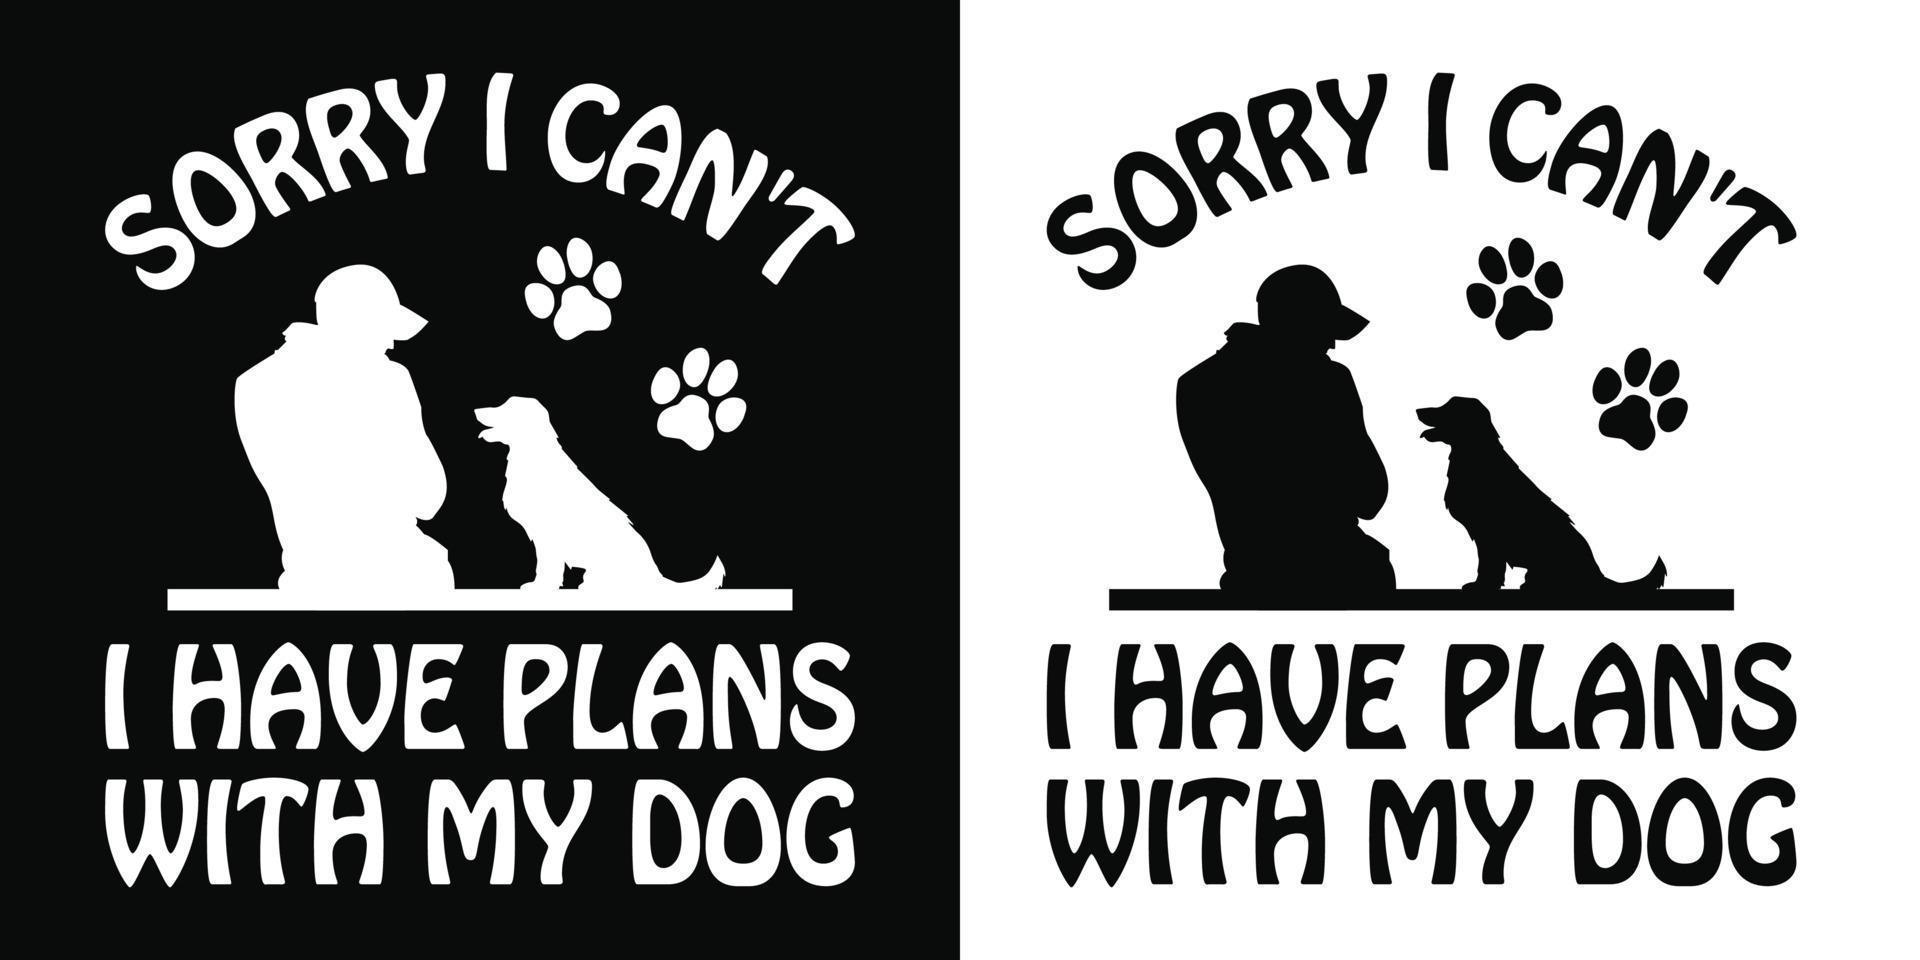 Sorry I Can't I have plans with my dog - dog t shirt, vector ...